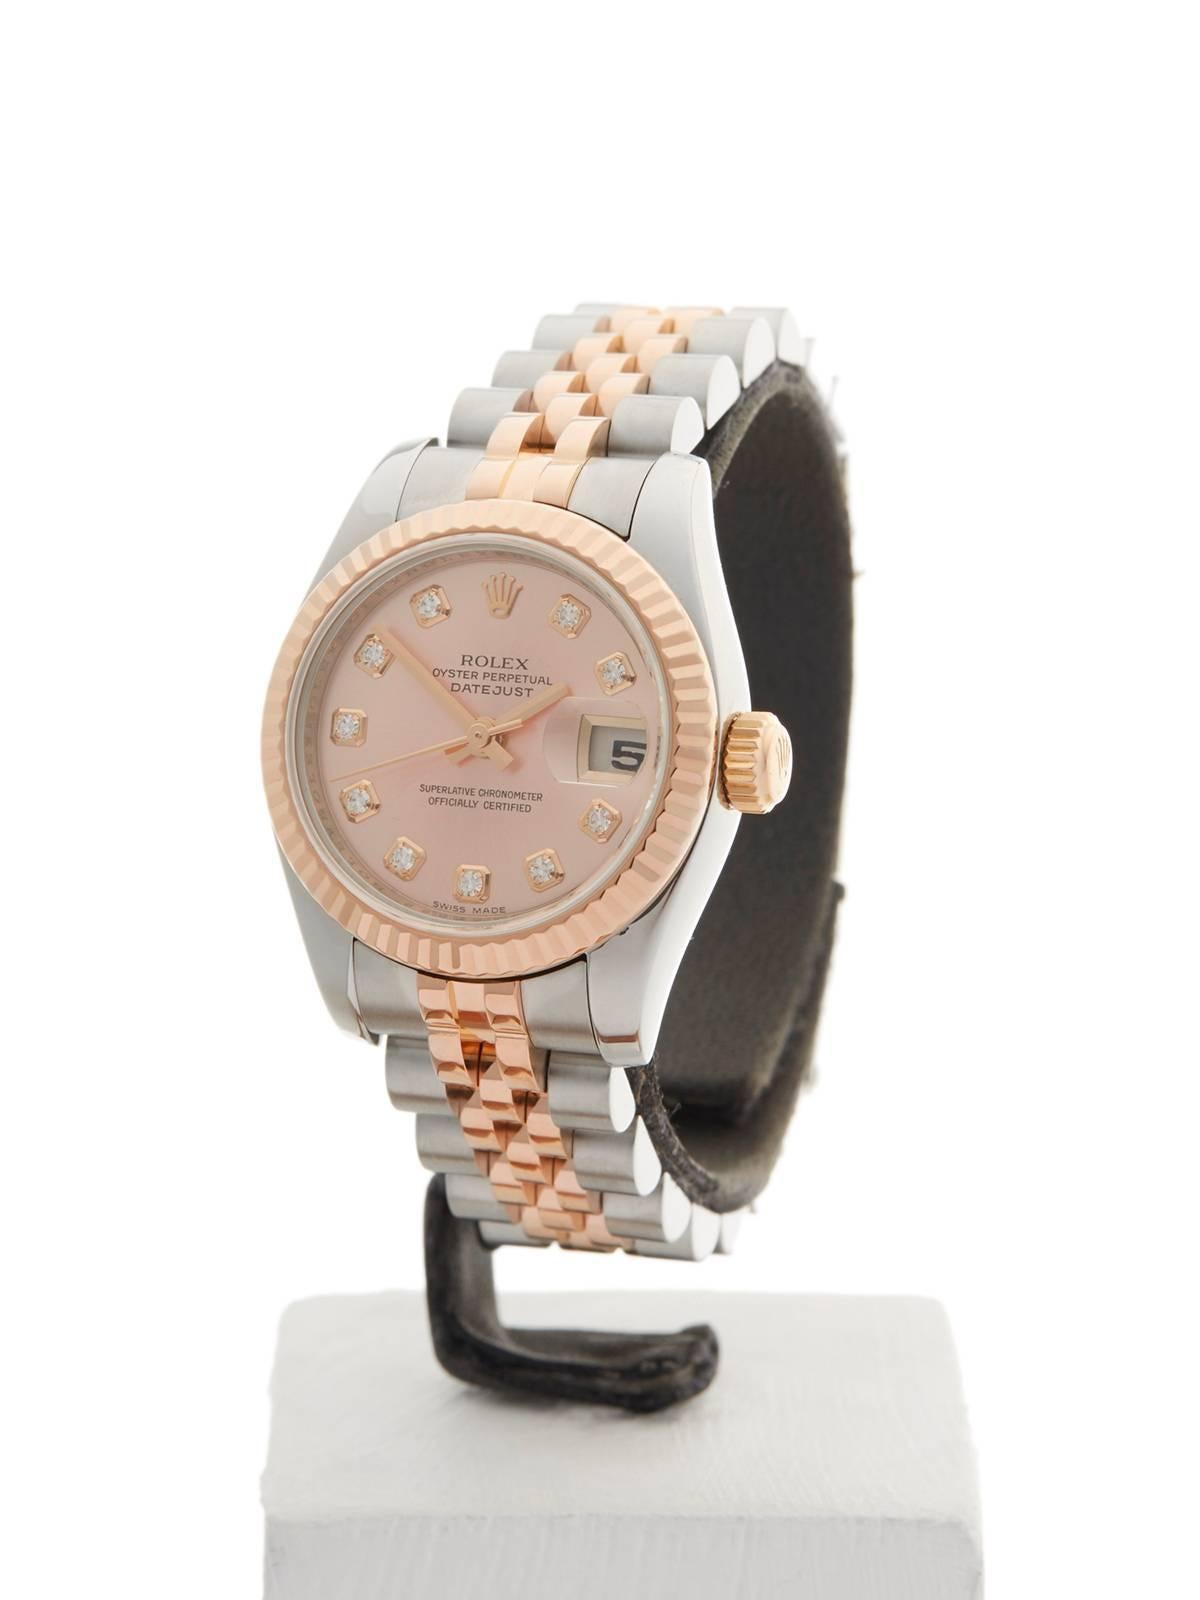 Ref: W3581
Model: 179171
Serial: D37****
Condition:  9 - Excellent condition
Age: 5th March 2007
Case Diameter: 26 mm
Case Size: 26mm
Box and Papers: Box, Manuals and Guarantee
Movement: Automatic
Case: Stainless Steel & 18k Rose Gold
Dial: Pink